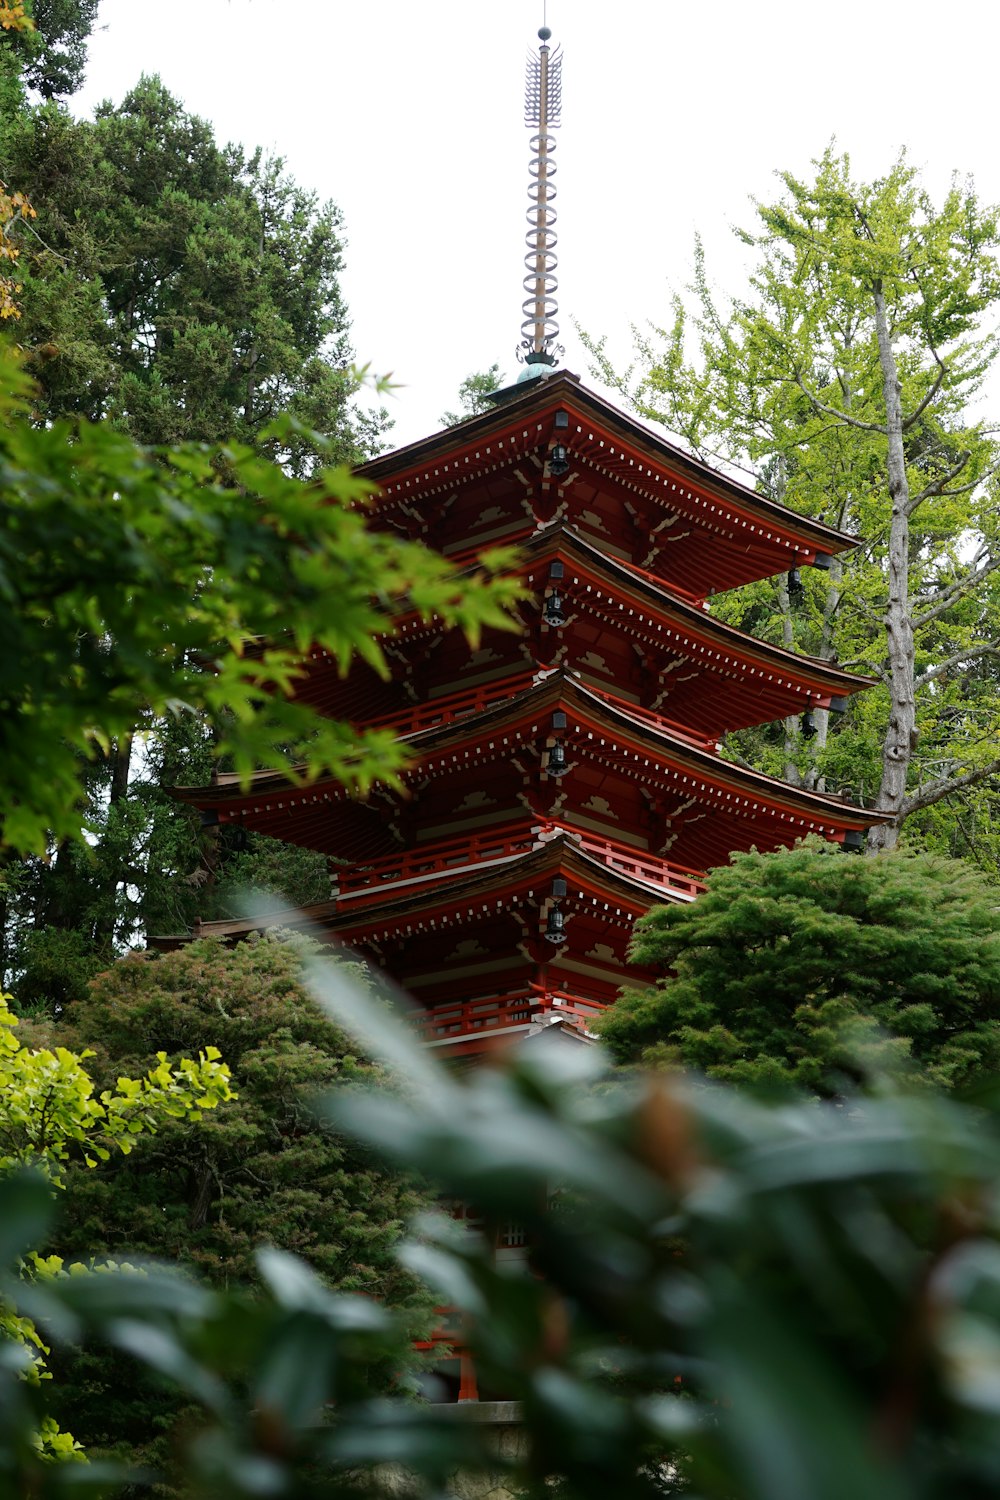 a tall red pagoda in the middle of a forest